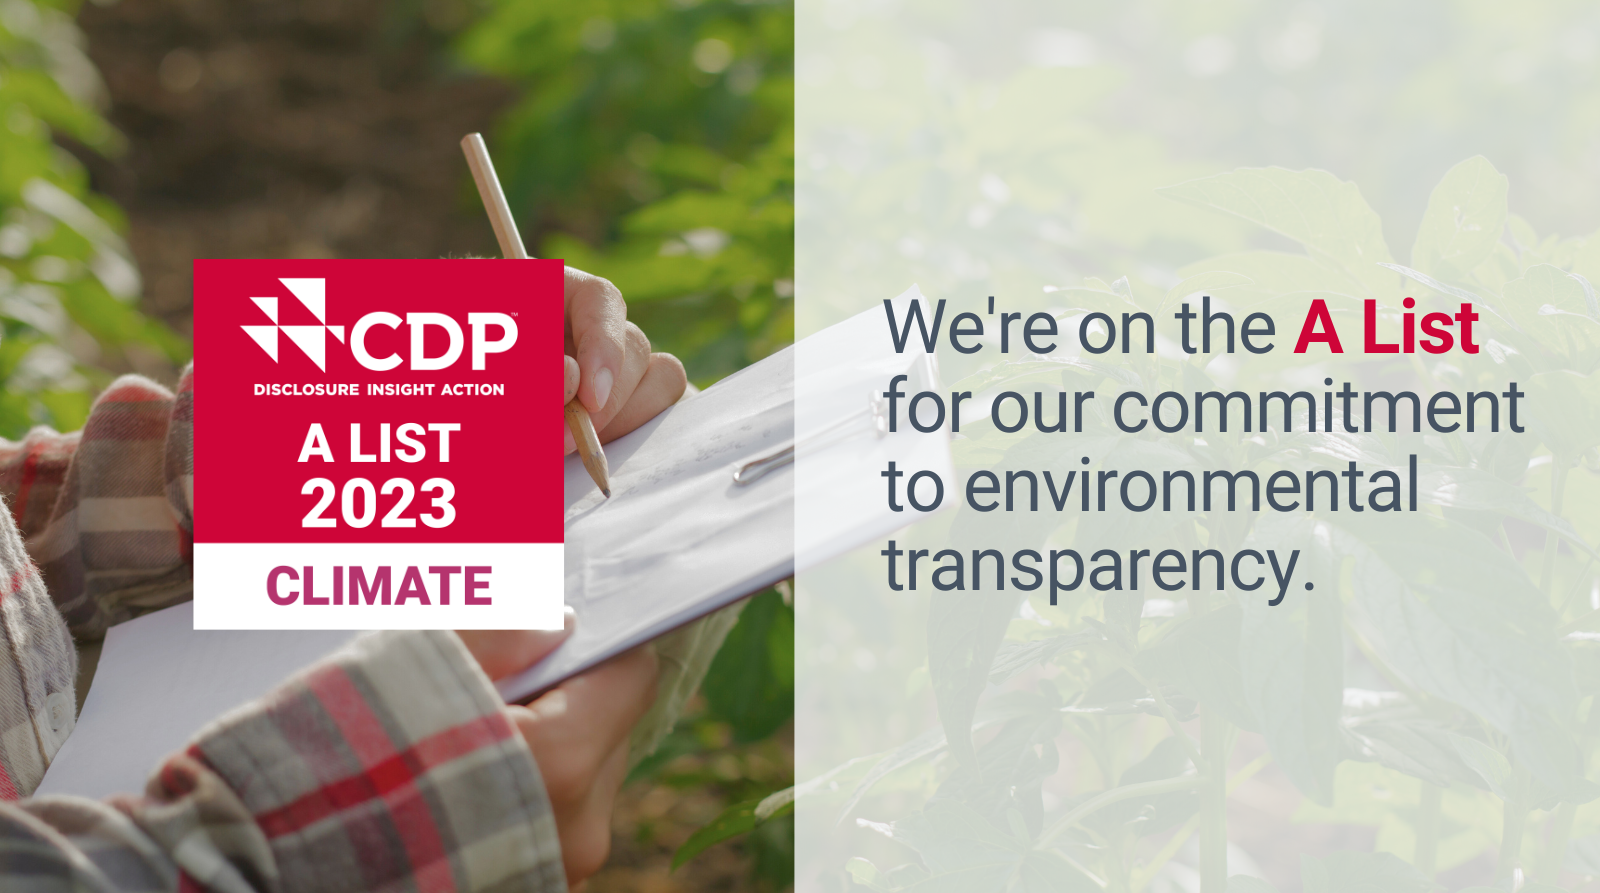 A person writes something in pencil on a pad, with the text next to it: We're on the A List for our commitment to environmental transparency"